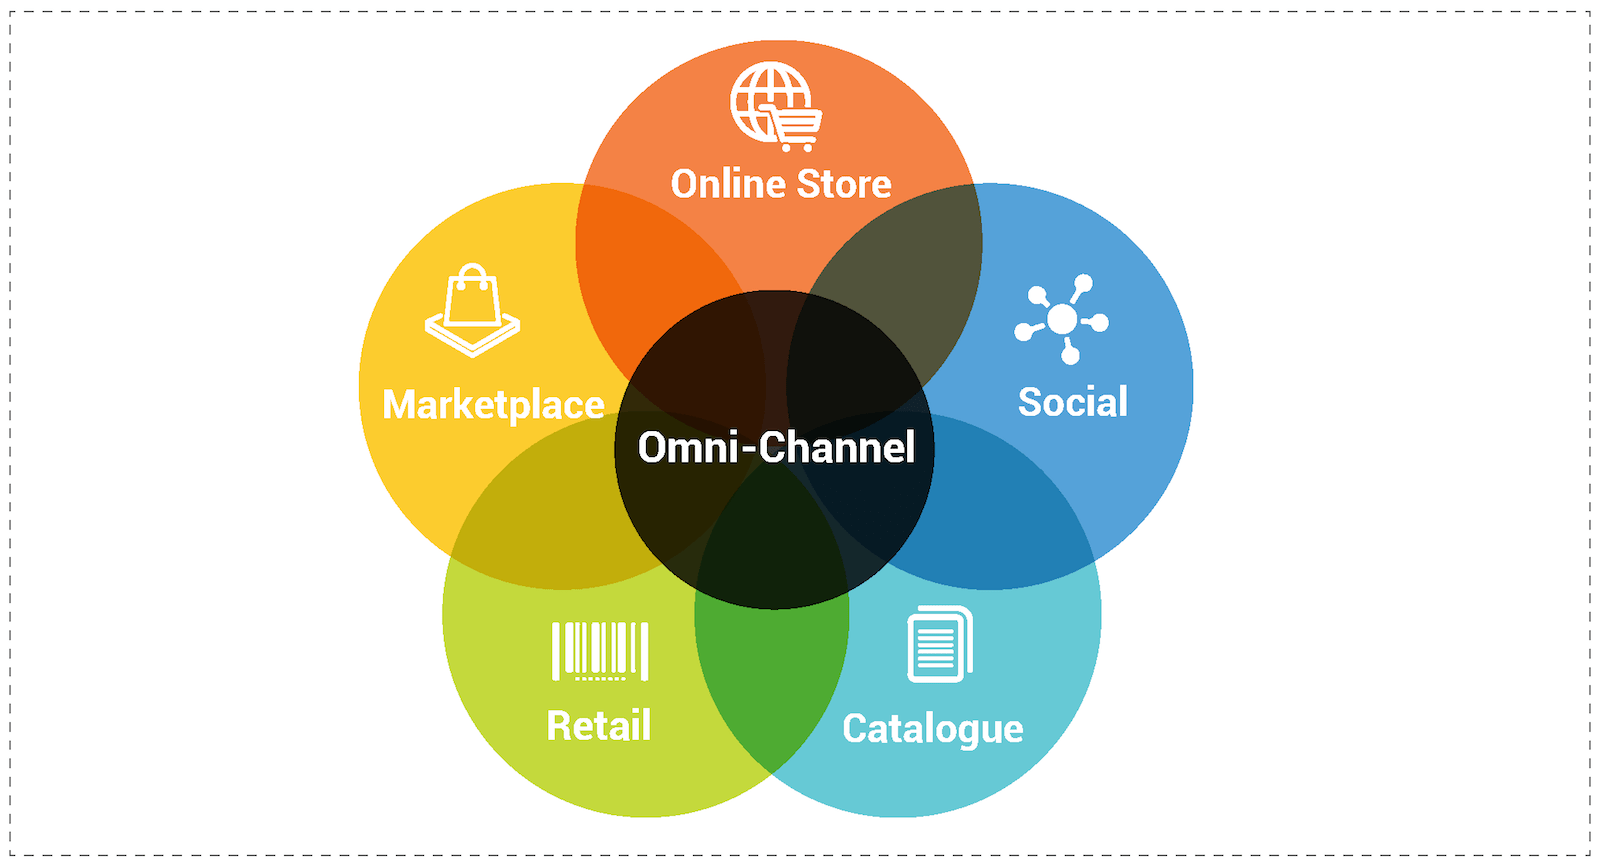 Omnichannel strategy: online store, social, catalogue, retail, marketplace